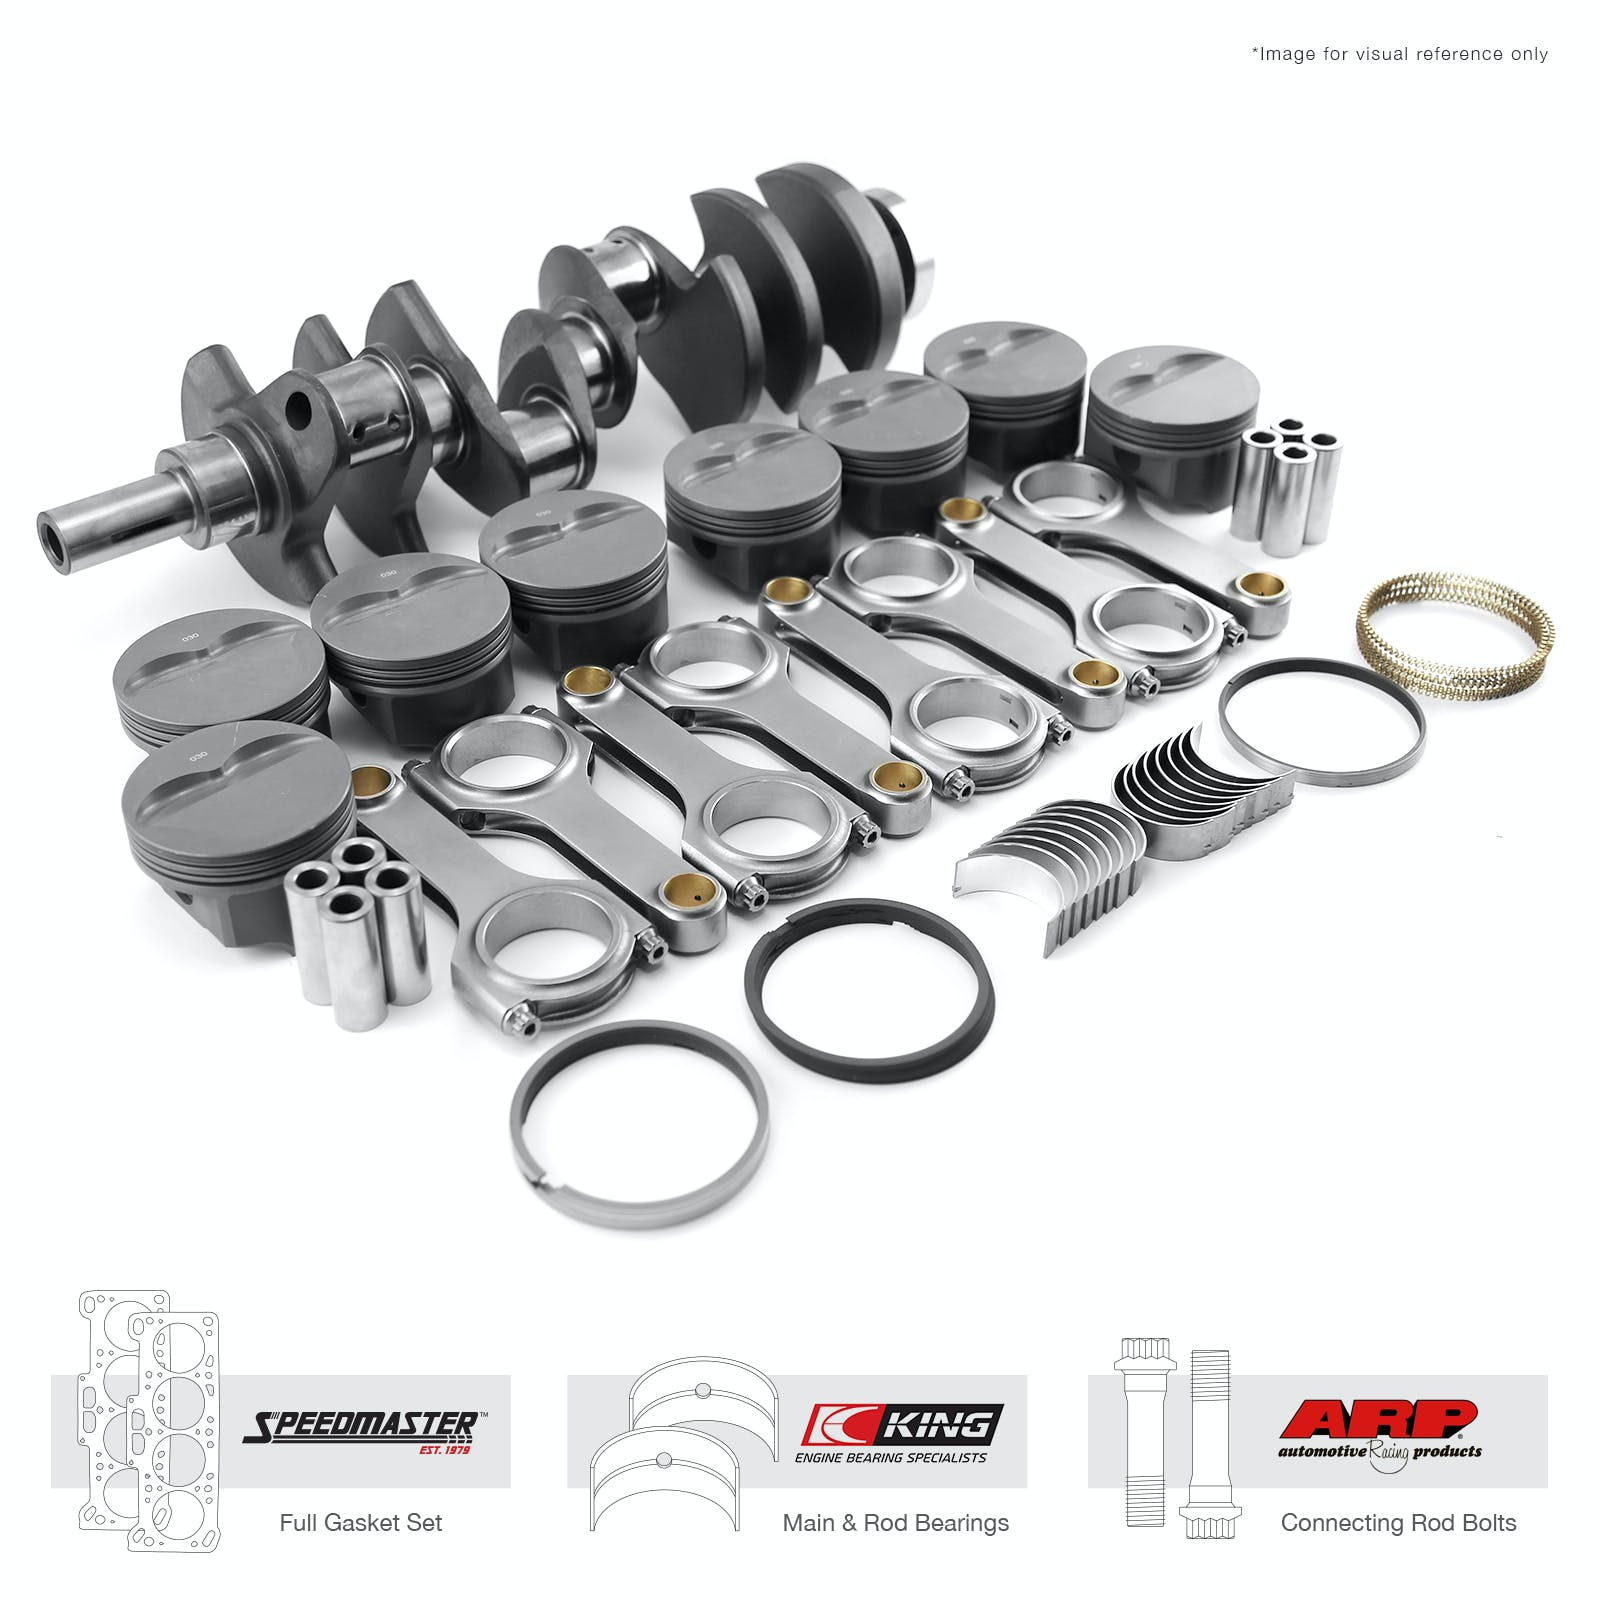 Speedmaster 1-290-007 3.400 347 ci Rotating Assembly Kit - Outlaw Series